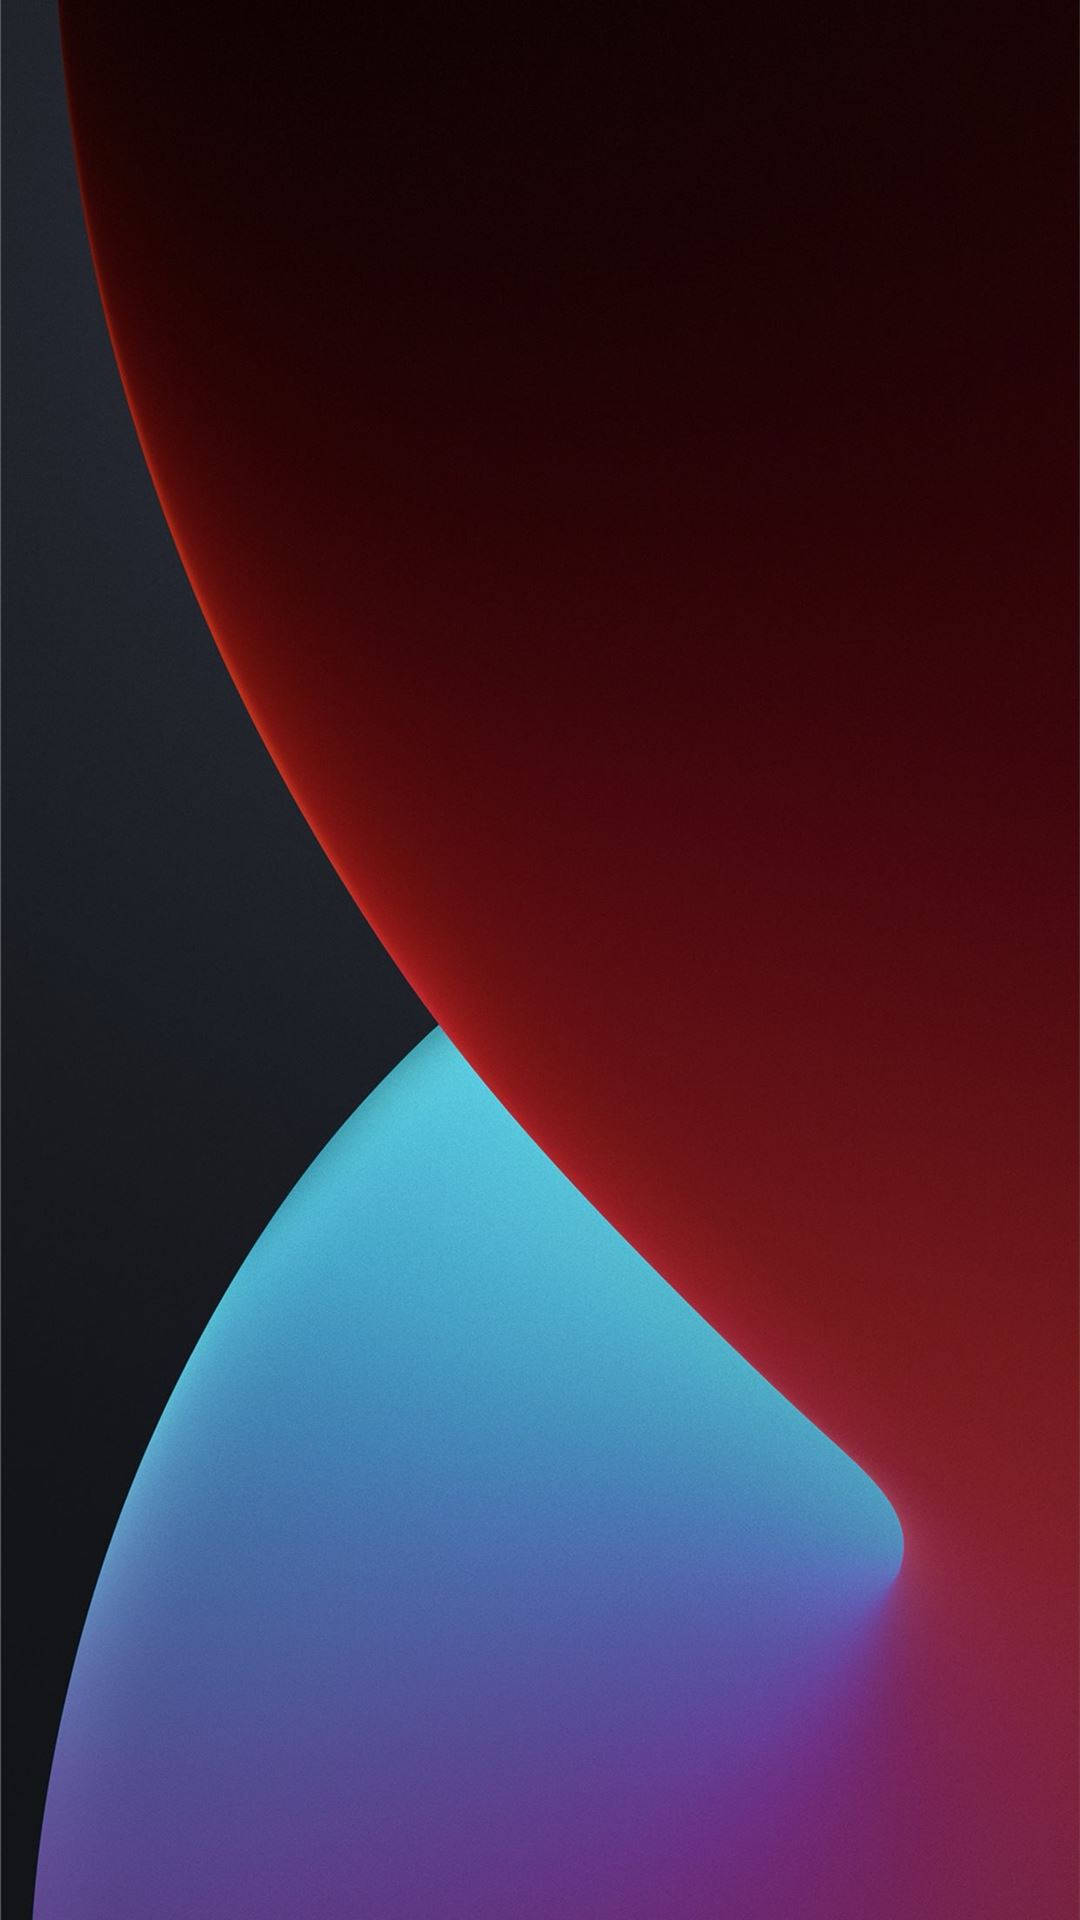 Free IOS 8 Wallpaper Downloads, [100+] IOS 8 Wallpapers for FREE |  